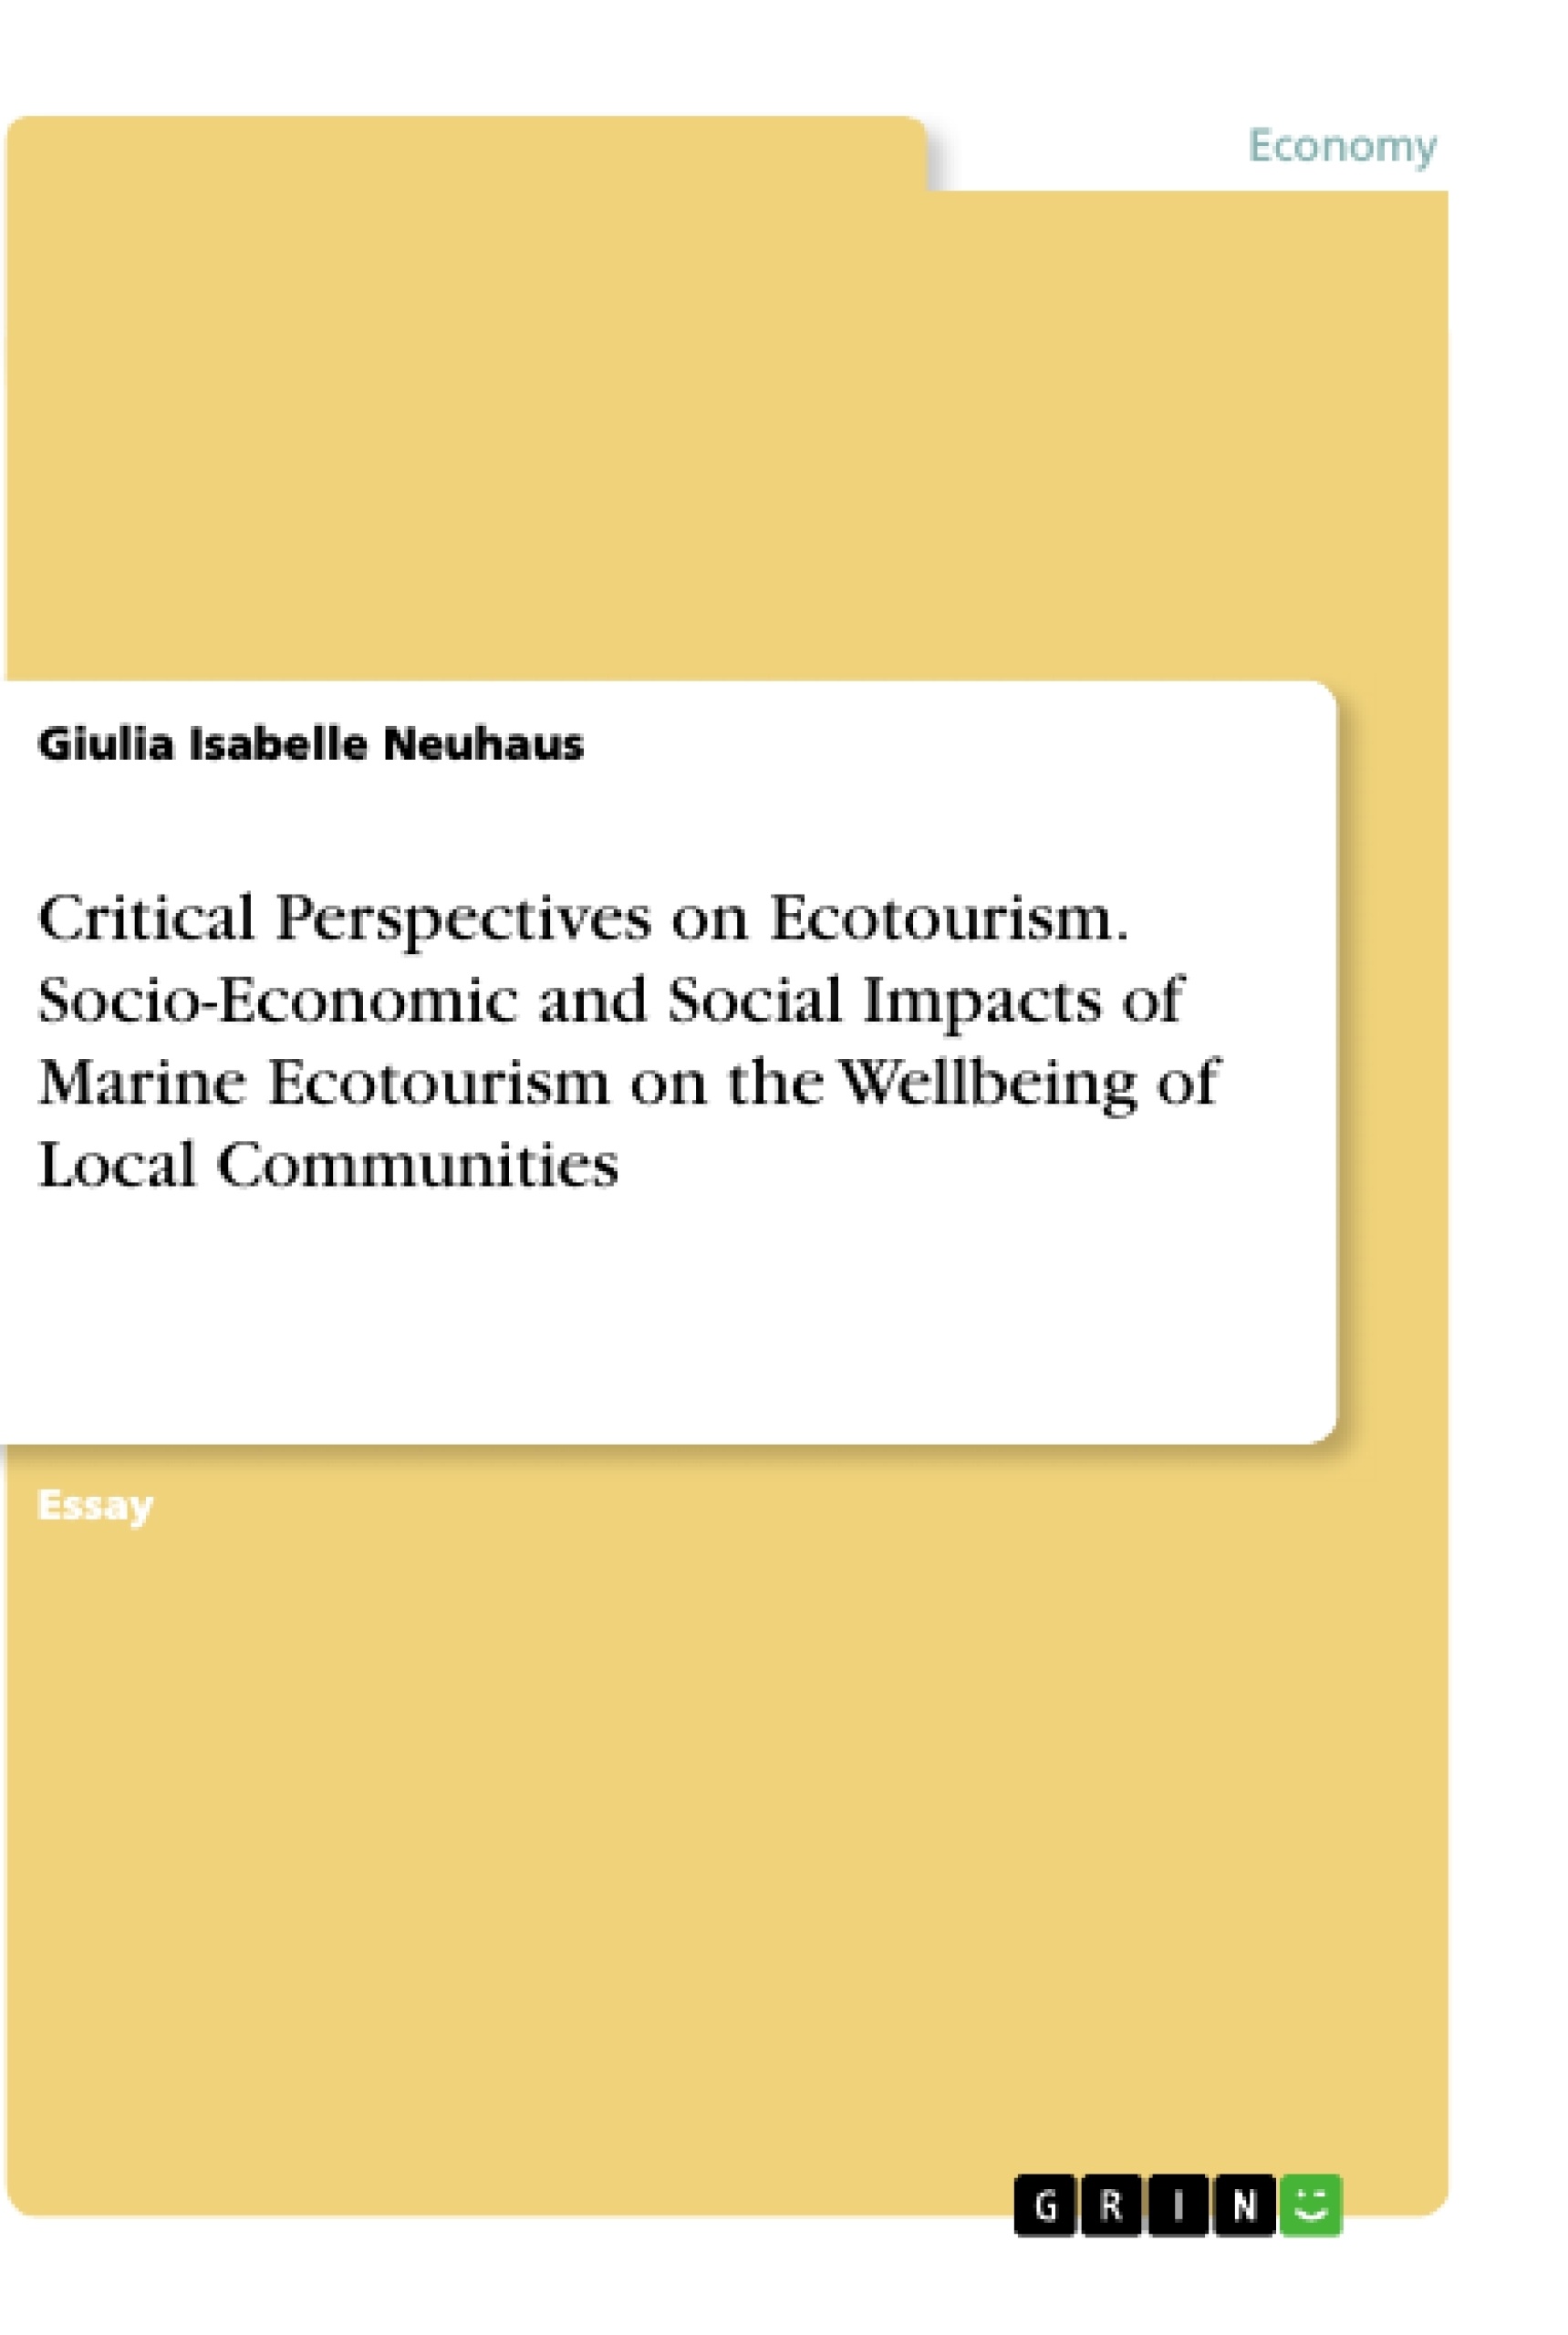 Title: Critical Perspectives on Ecotourism. Socio-Economic and Social Impacts of Marine Ecotourism on the Wellbeing of Local Communities